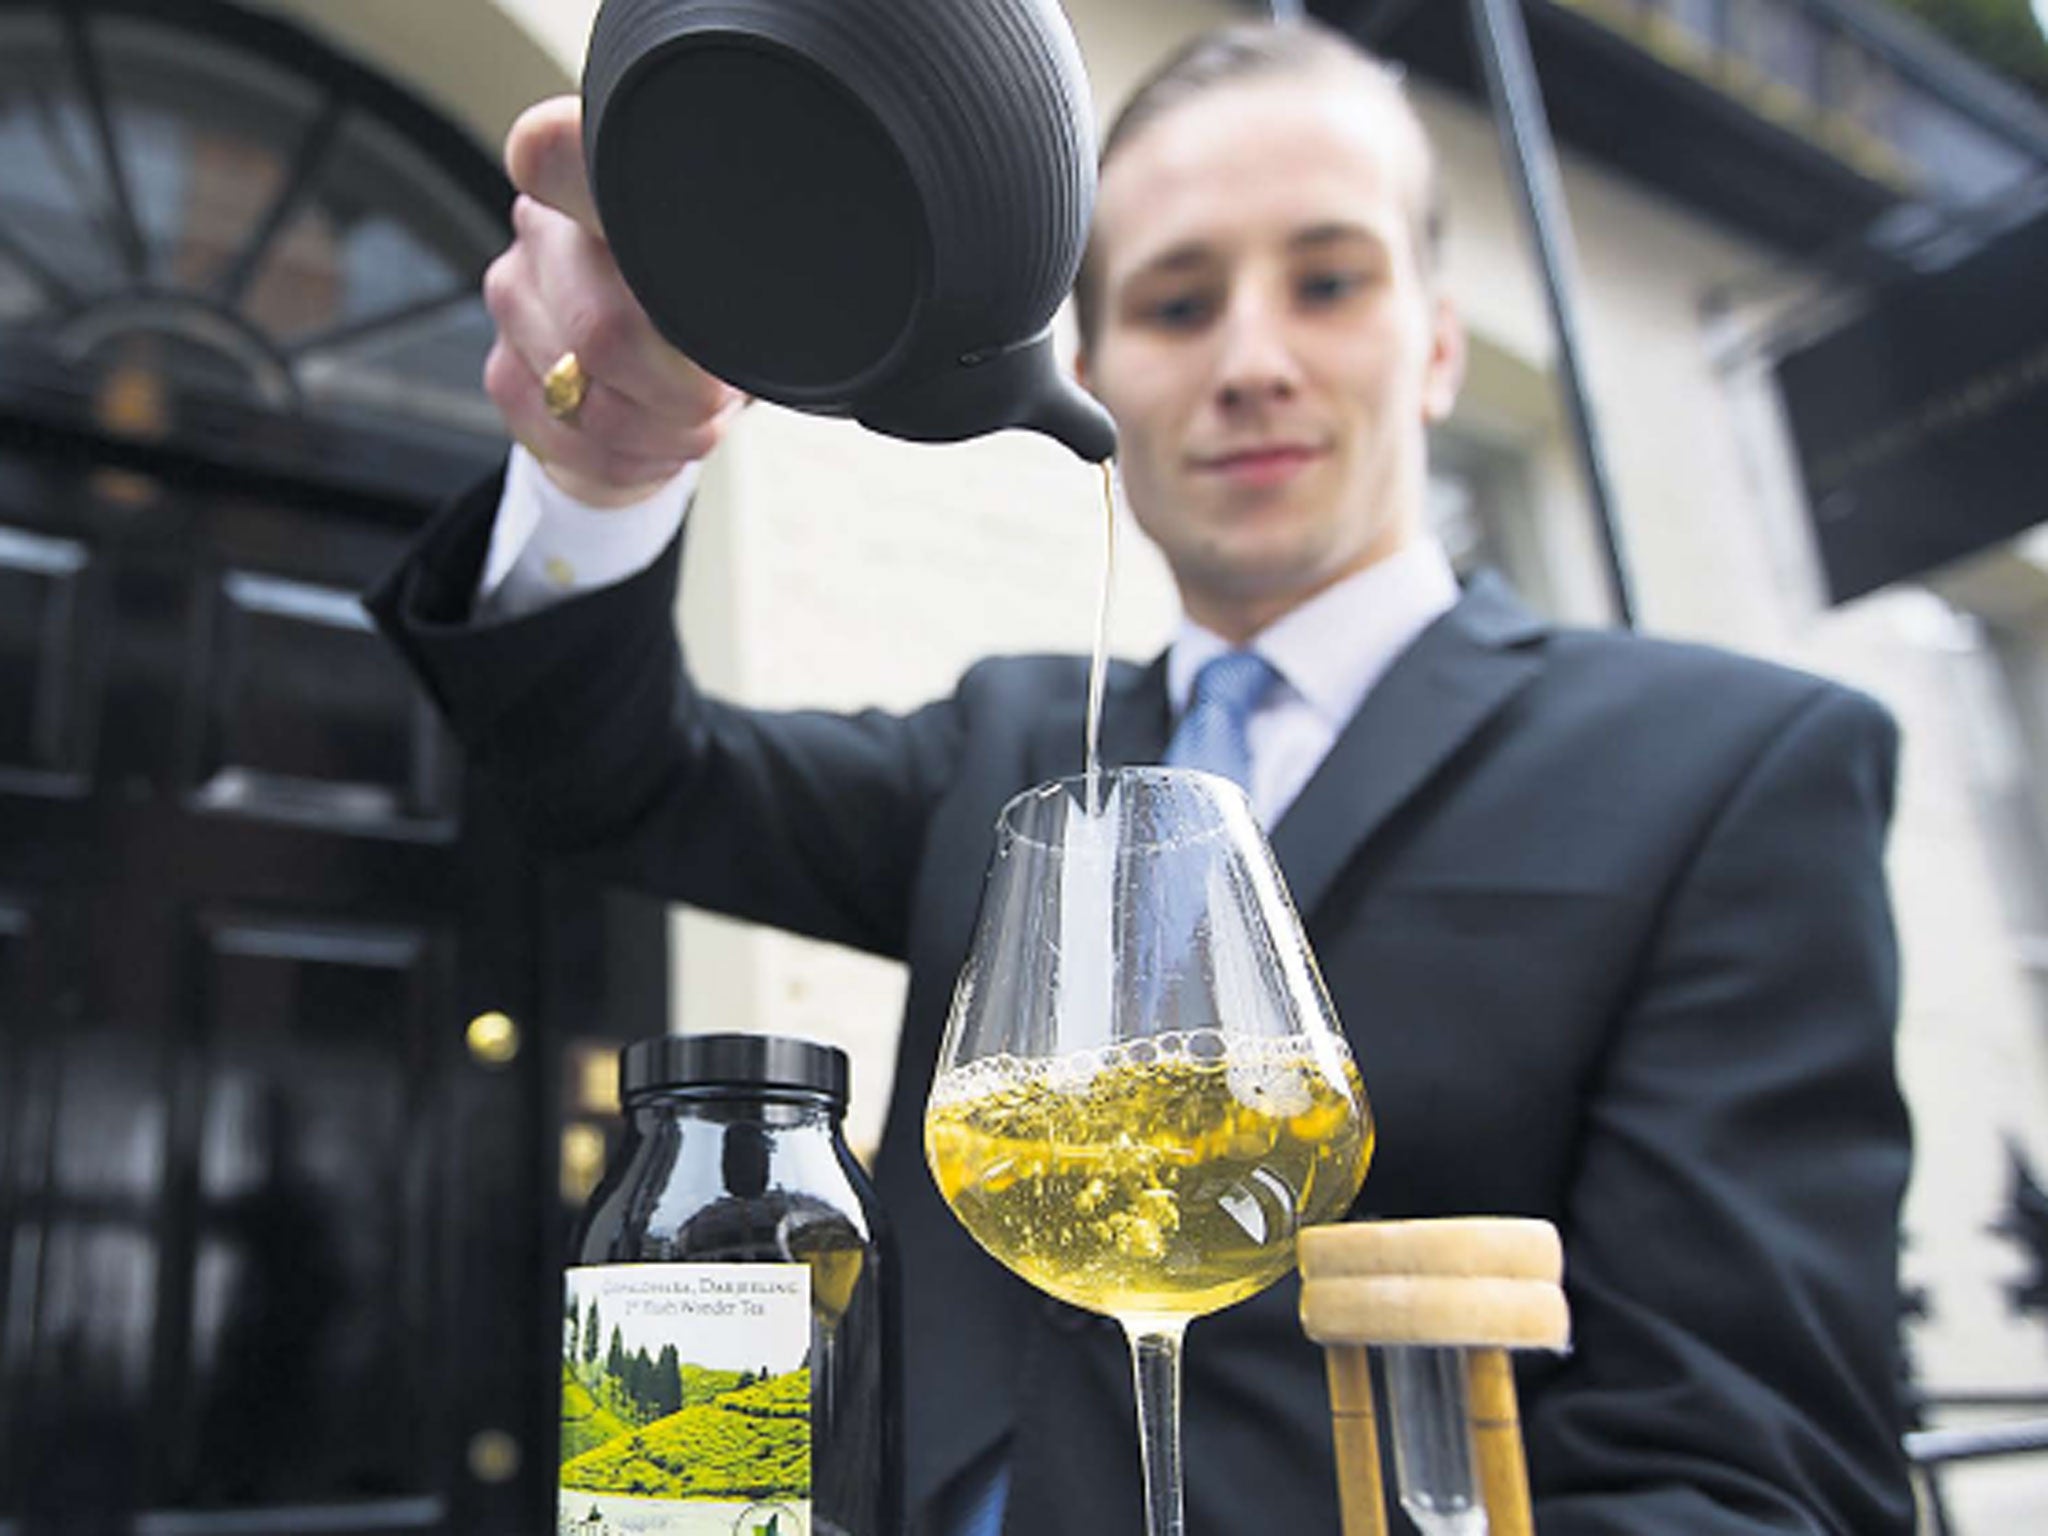 A speciality Darjeeling tea brewed at Gauthier Soho in London